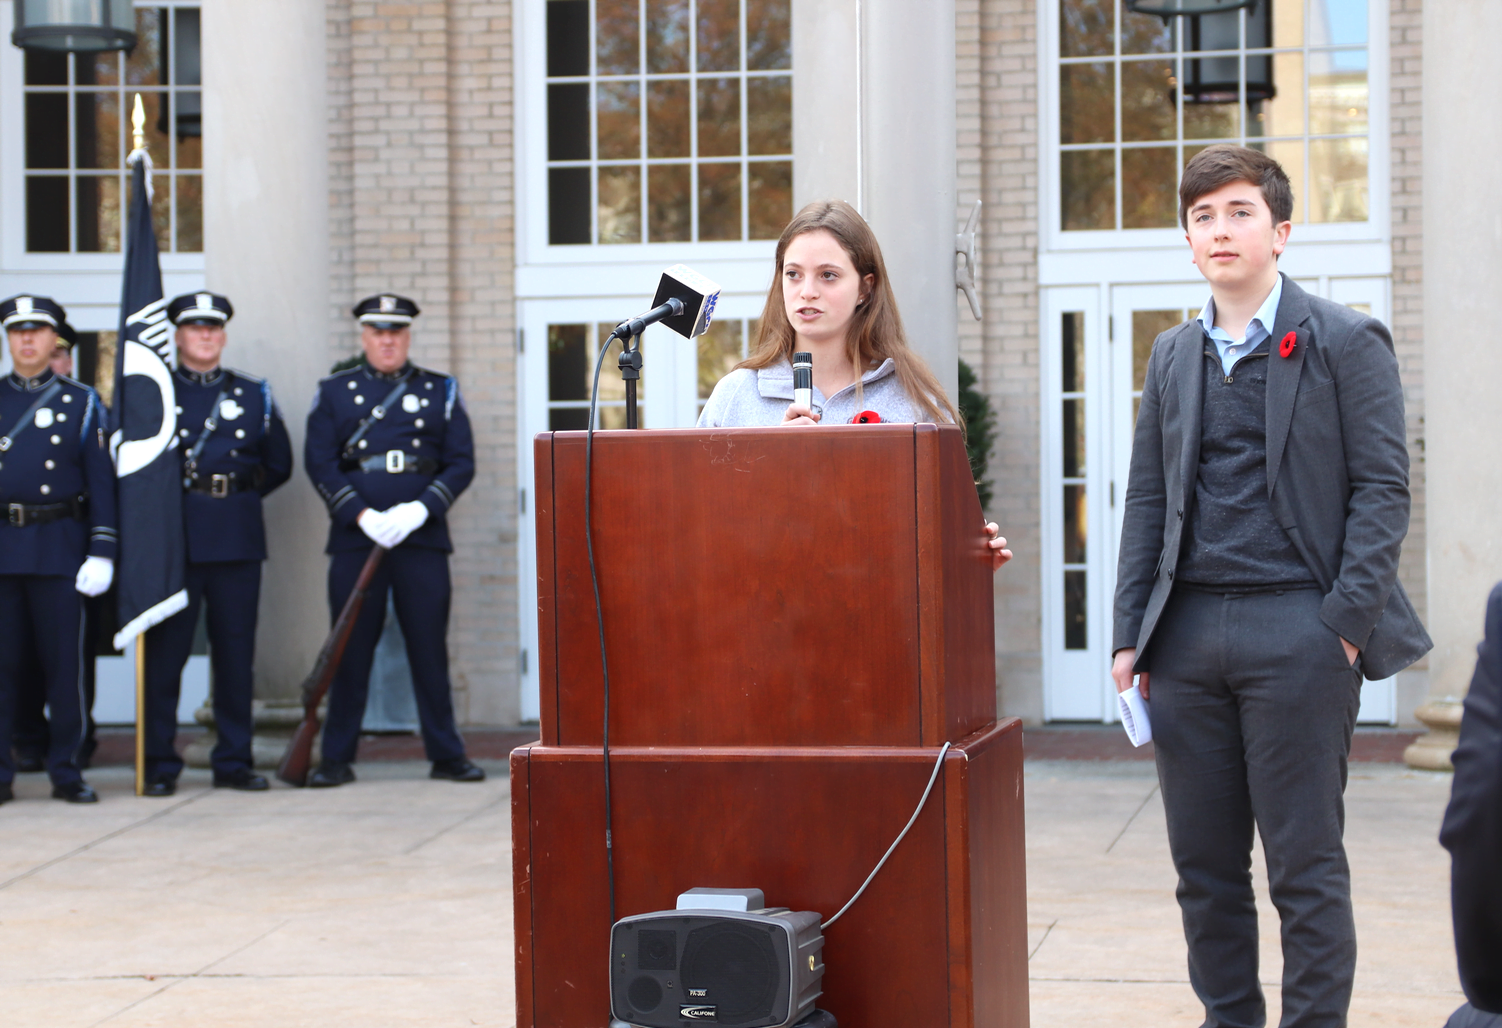 American Legion Young Persons of the Year Izzy Kalb from Greenwich Academy and Toby Hirsh from Greenwich High School. Nov 11, 2019 Photo: Leslie Yager